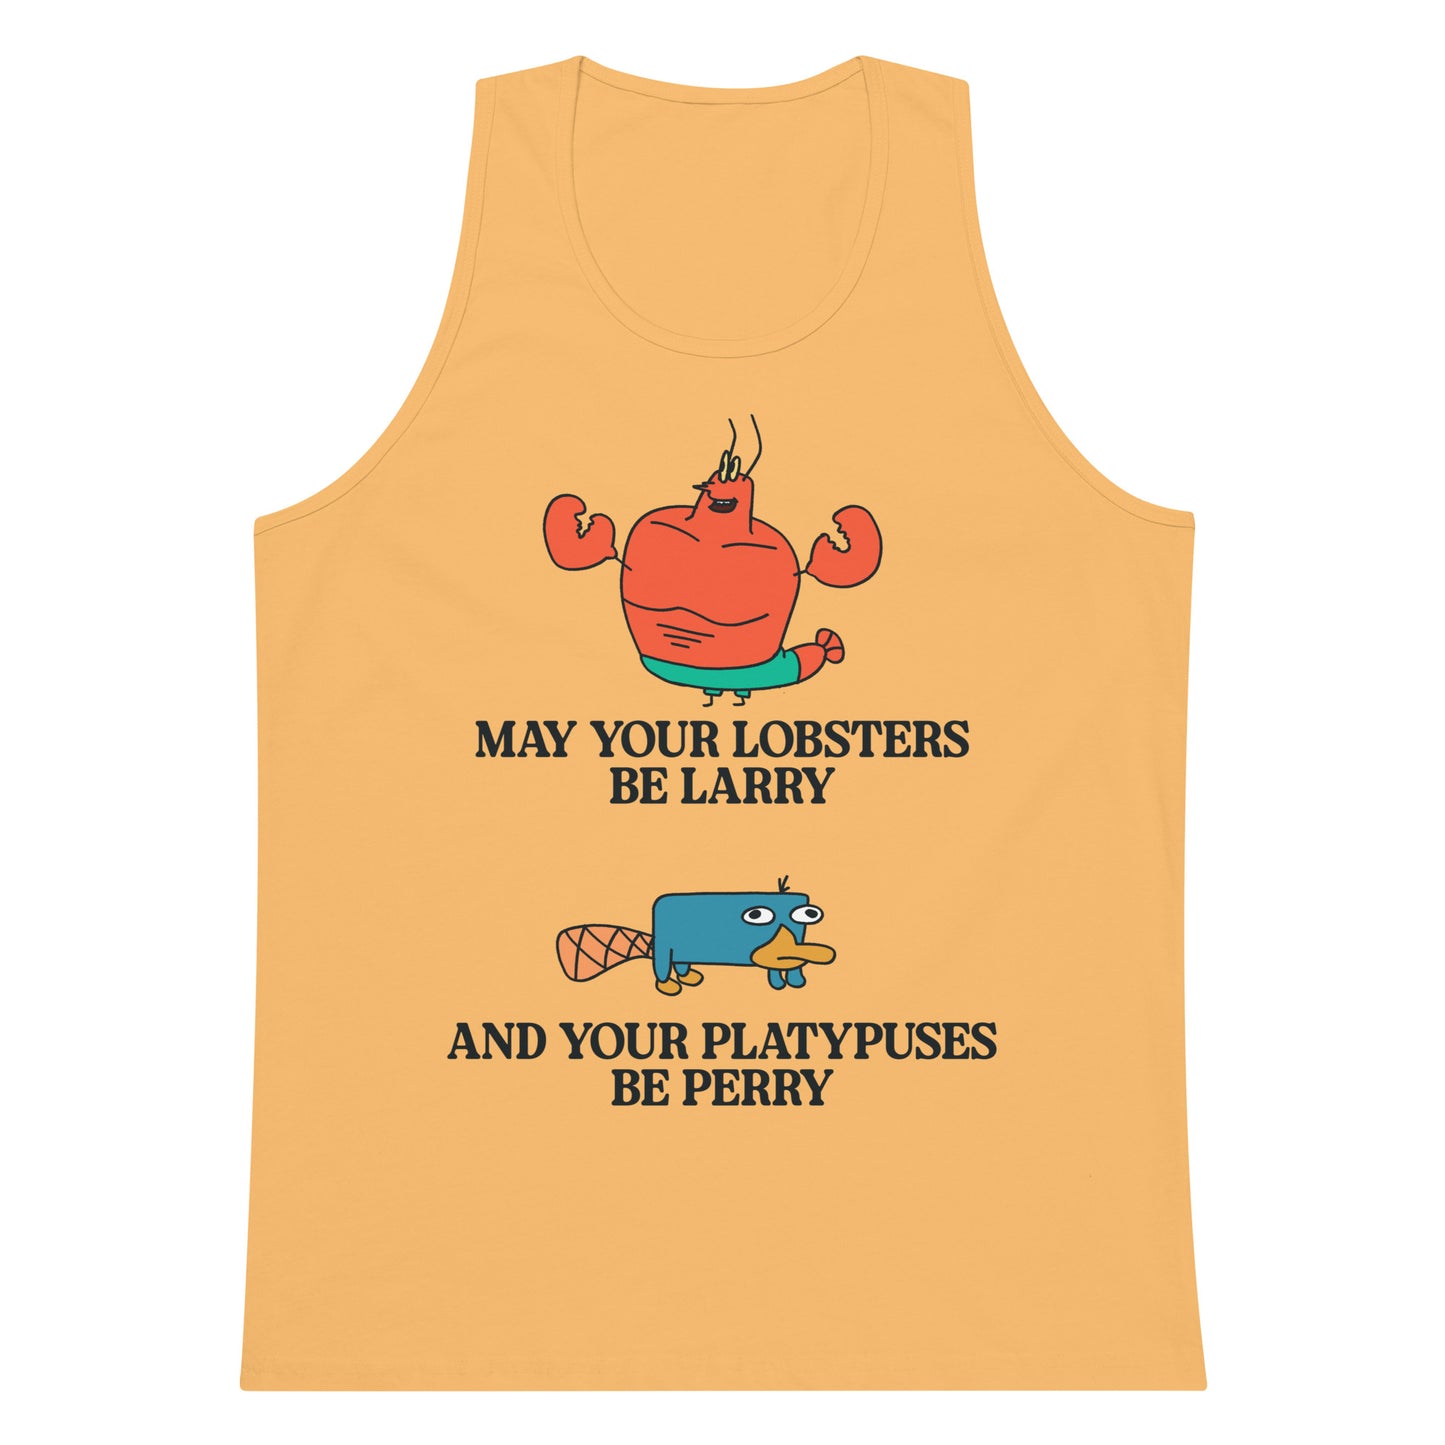 Lobsters Be Larry Platypuses Be Perry tank top